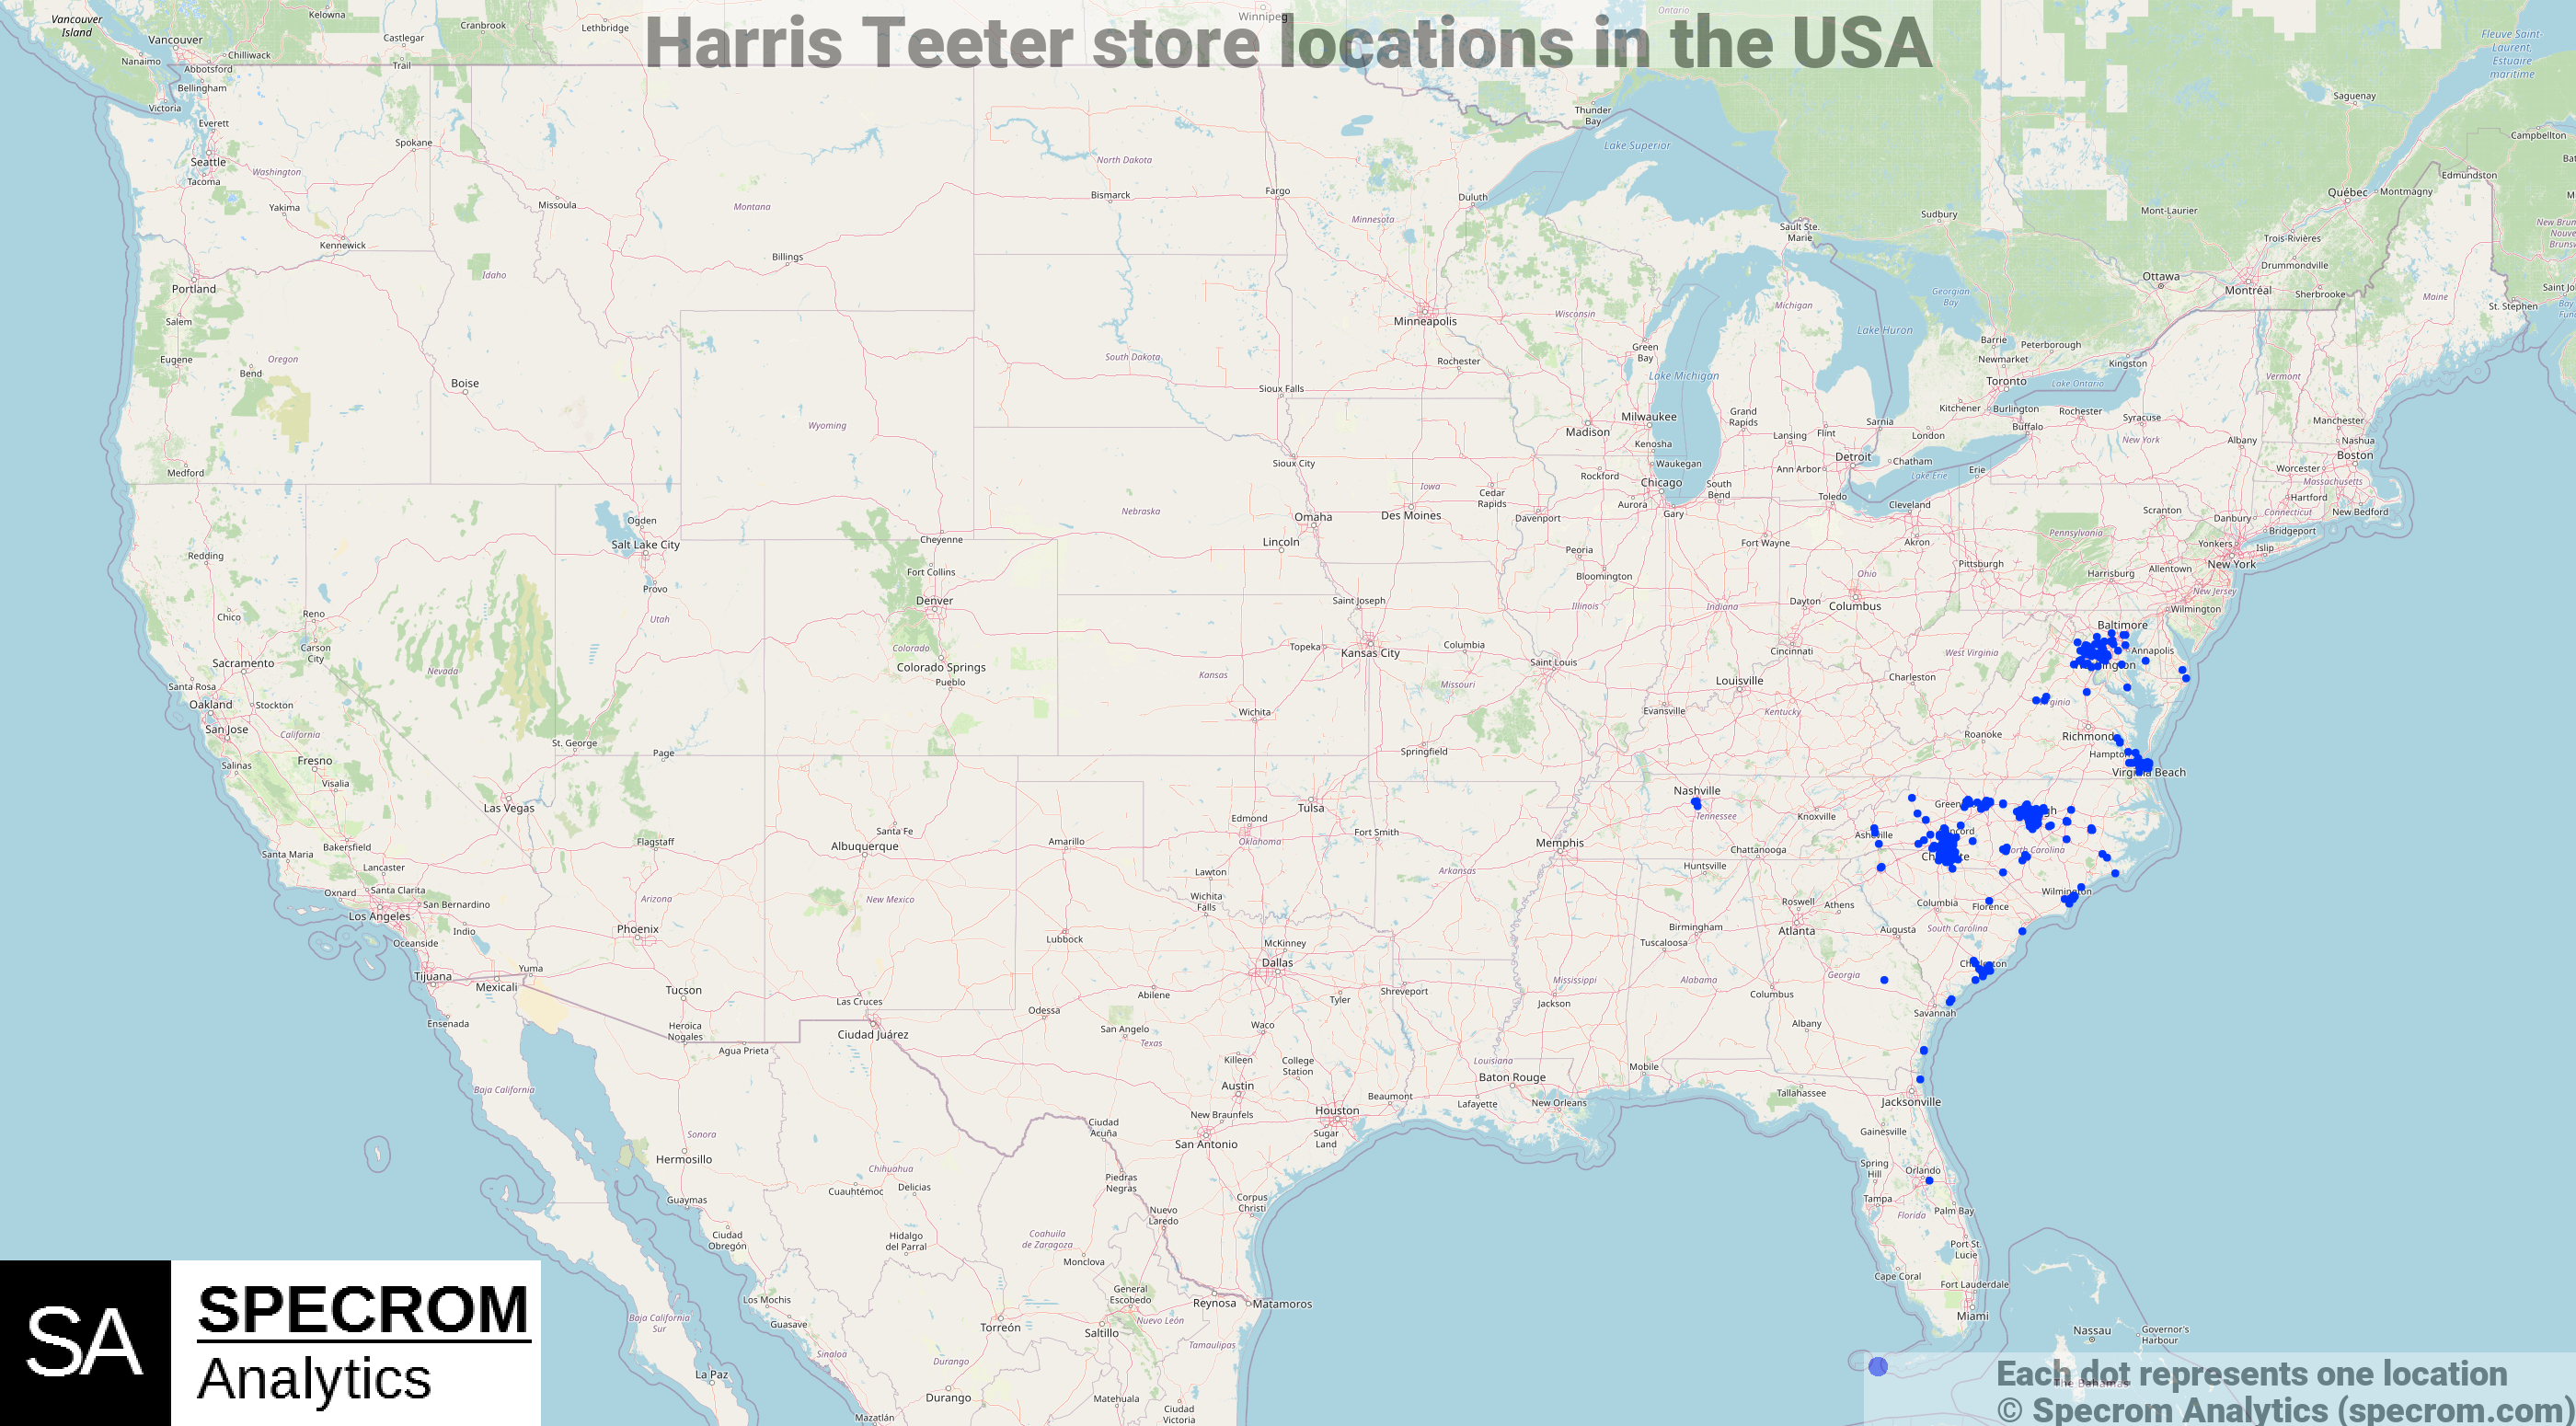 Harris Teeter store locations in the USA